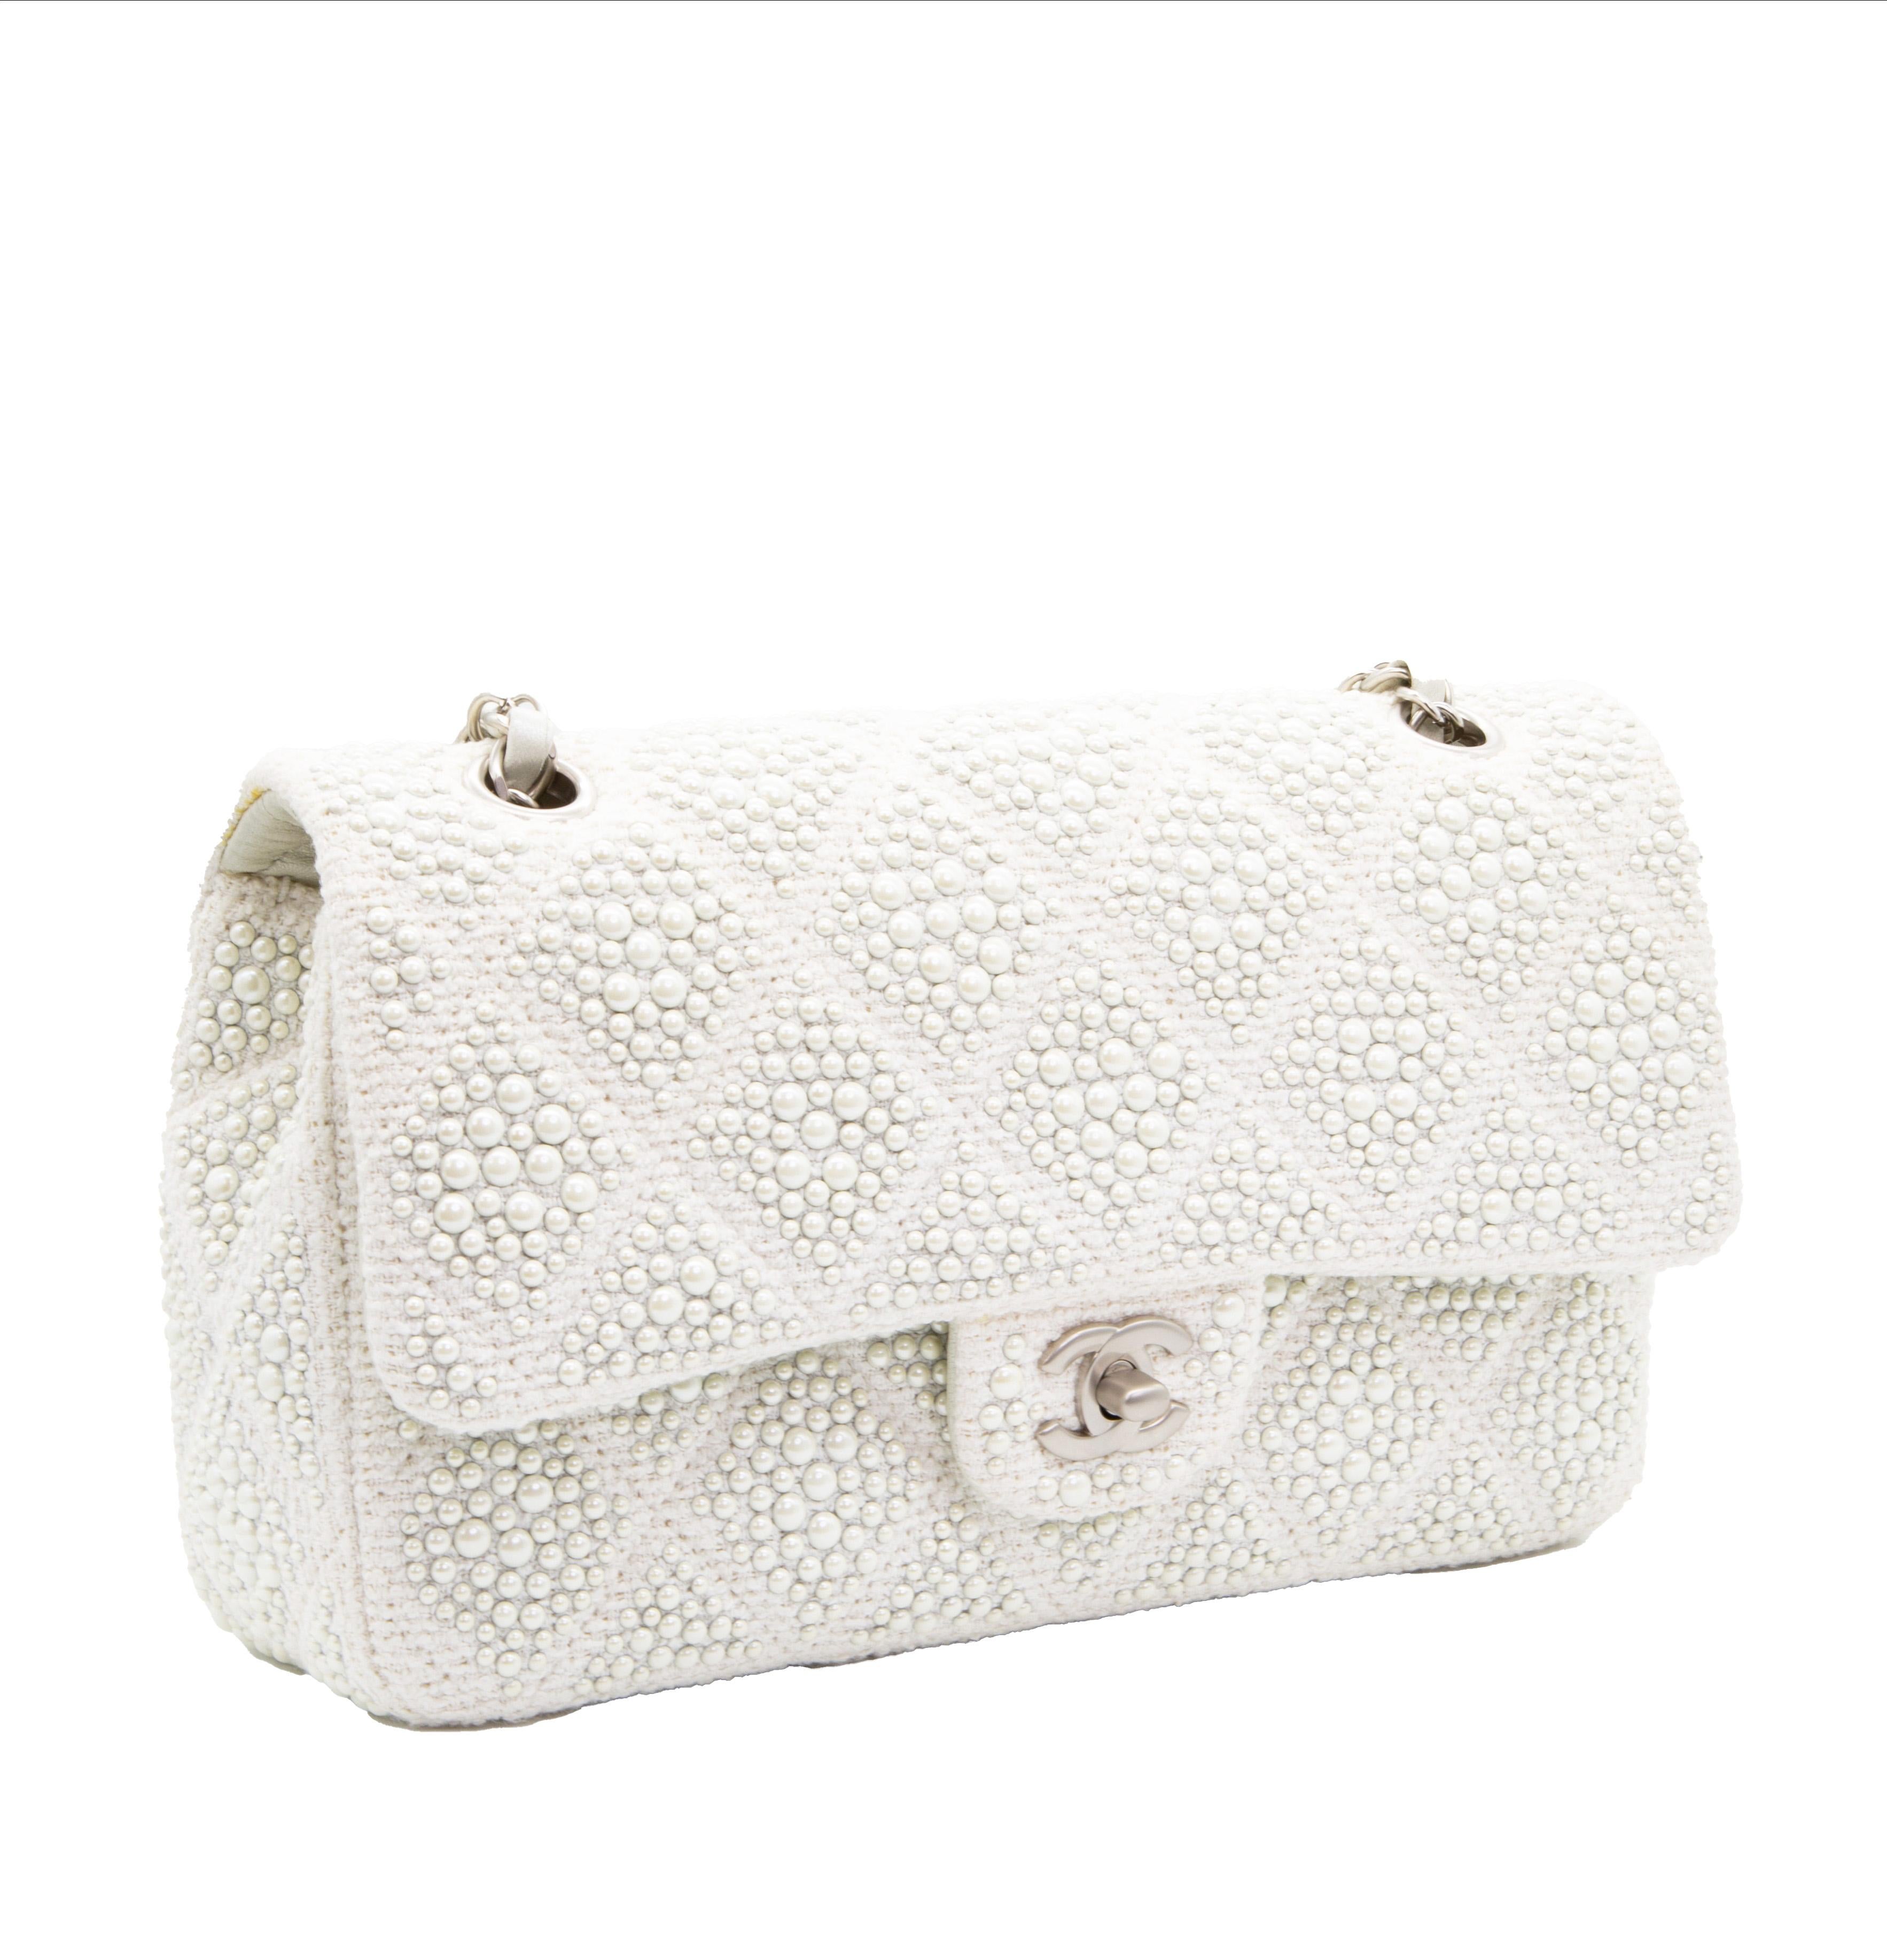 This pearl white Chanel bag from the Spring Summer 2015 collection is a playful yet classy version of the classic Chanel flap bag. The combination of the iconic shape and the delicate pearl embellishments, which are a historic part of Chanel brand,